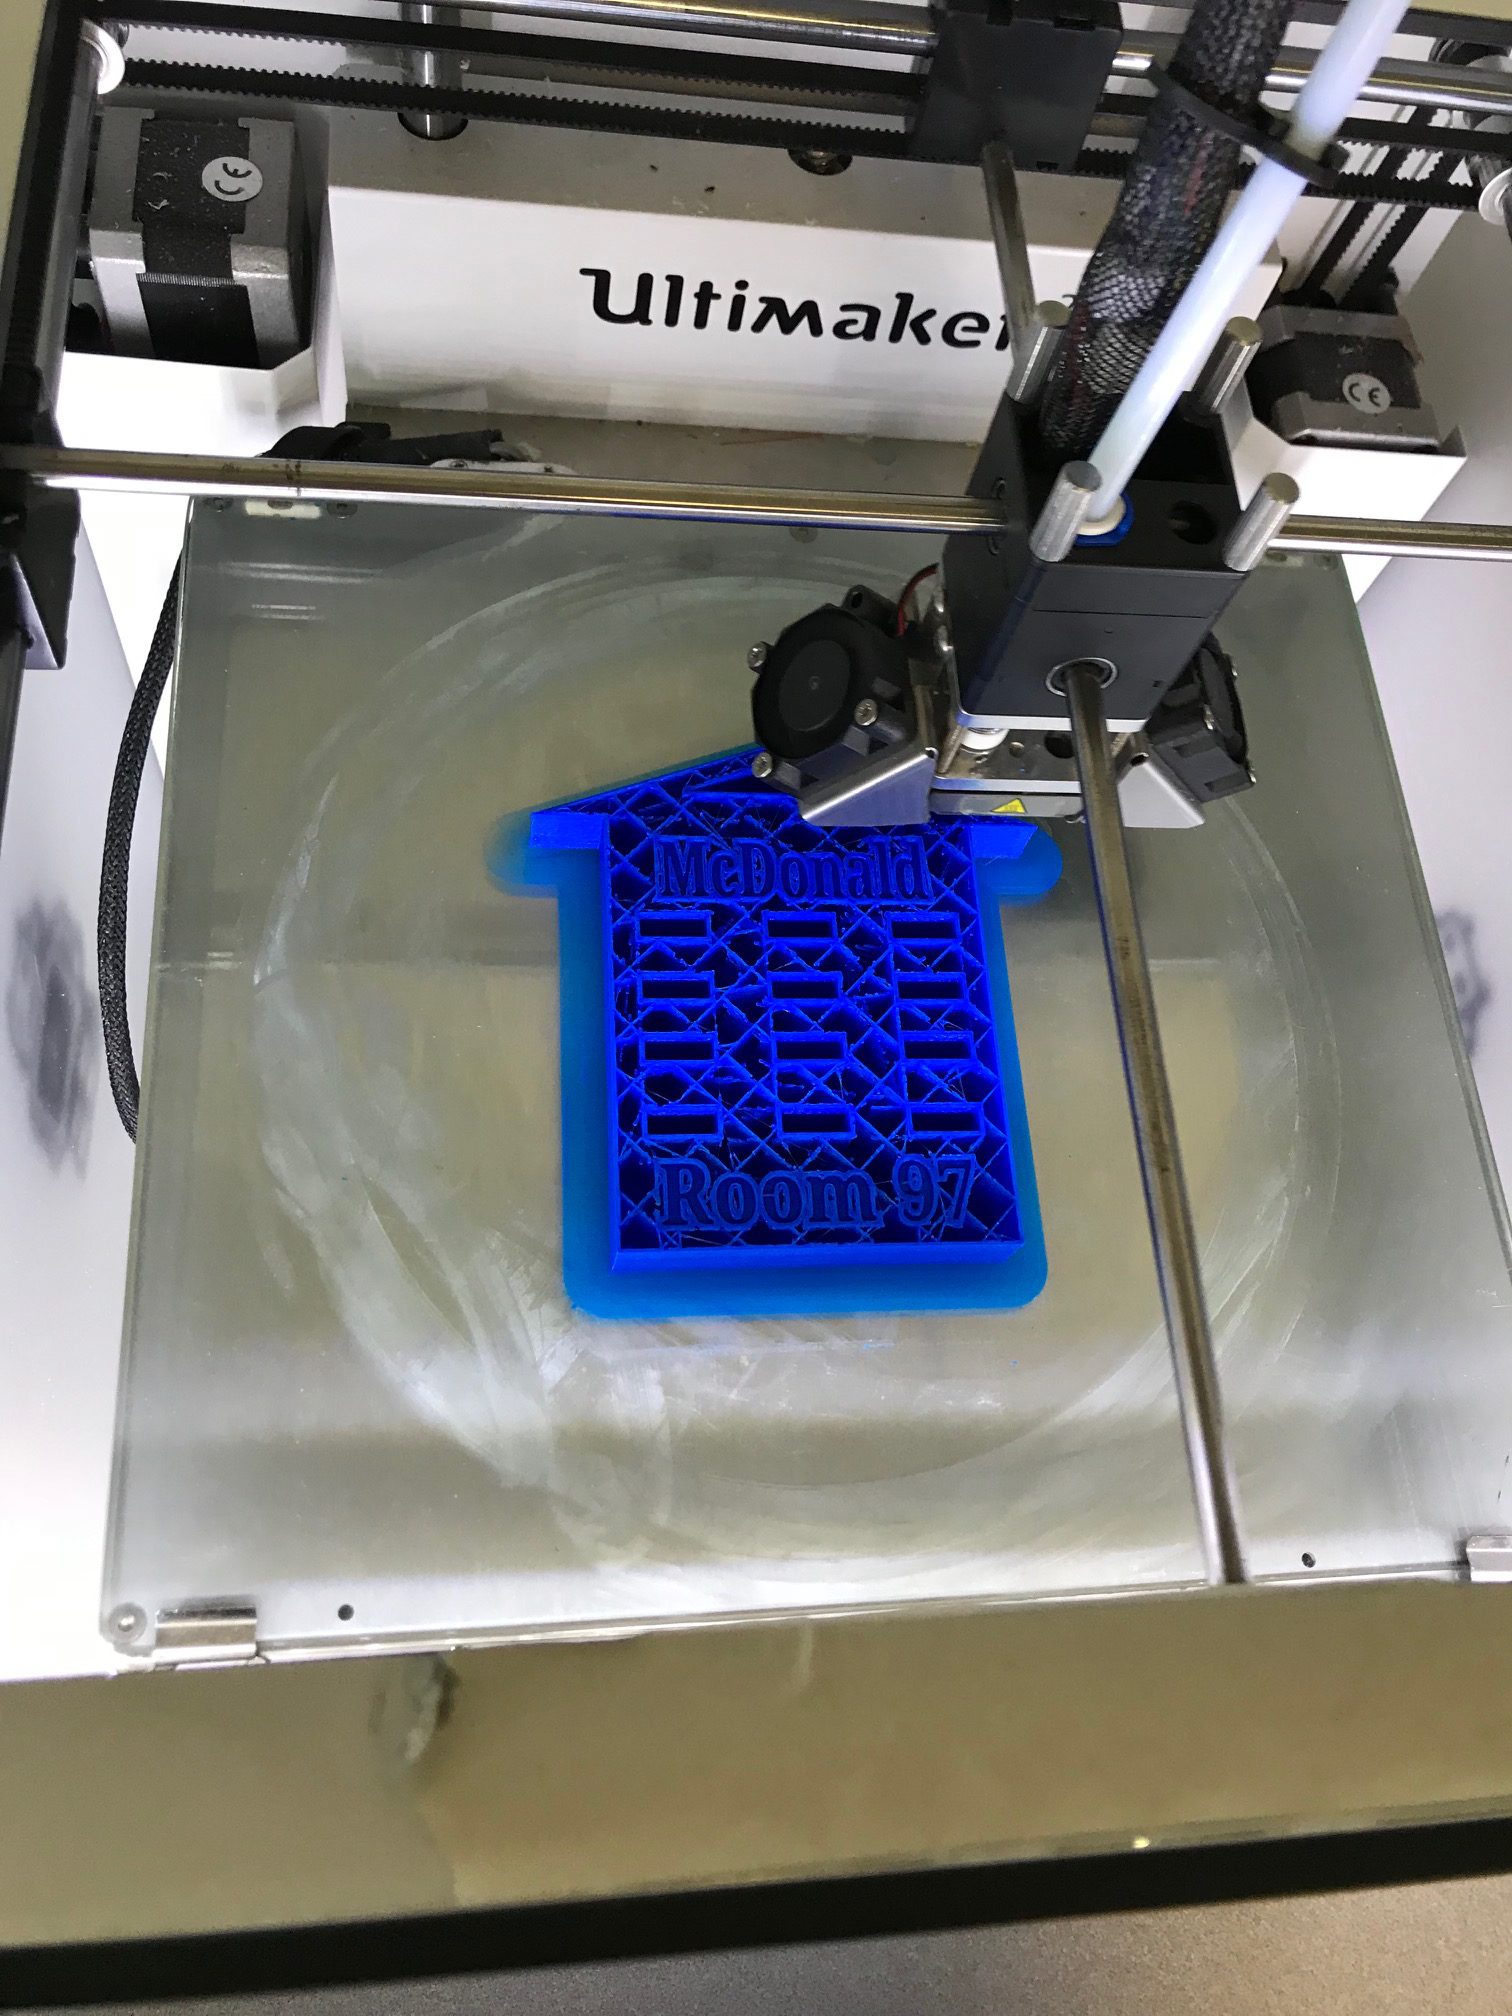 The 3D print of the USB holder in progress